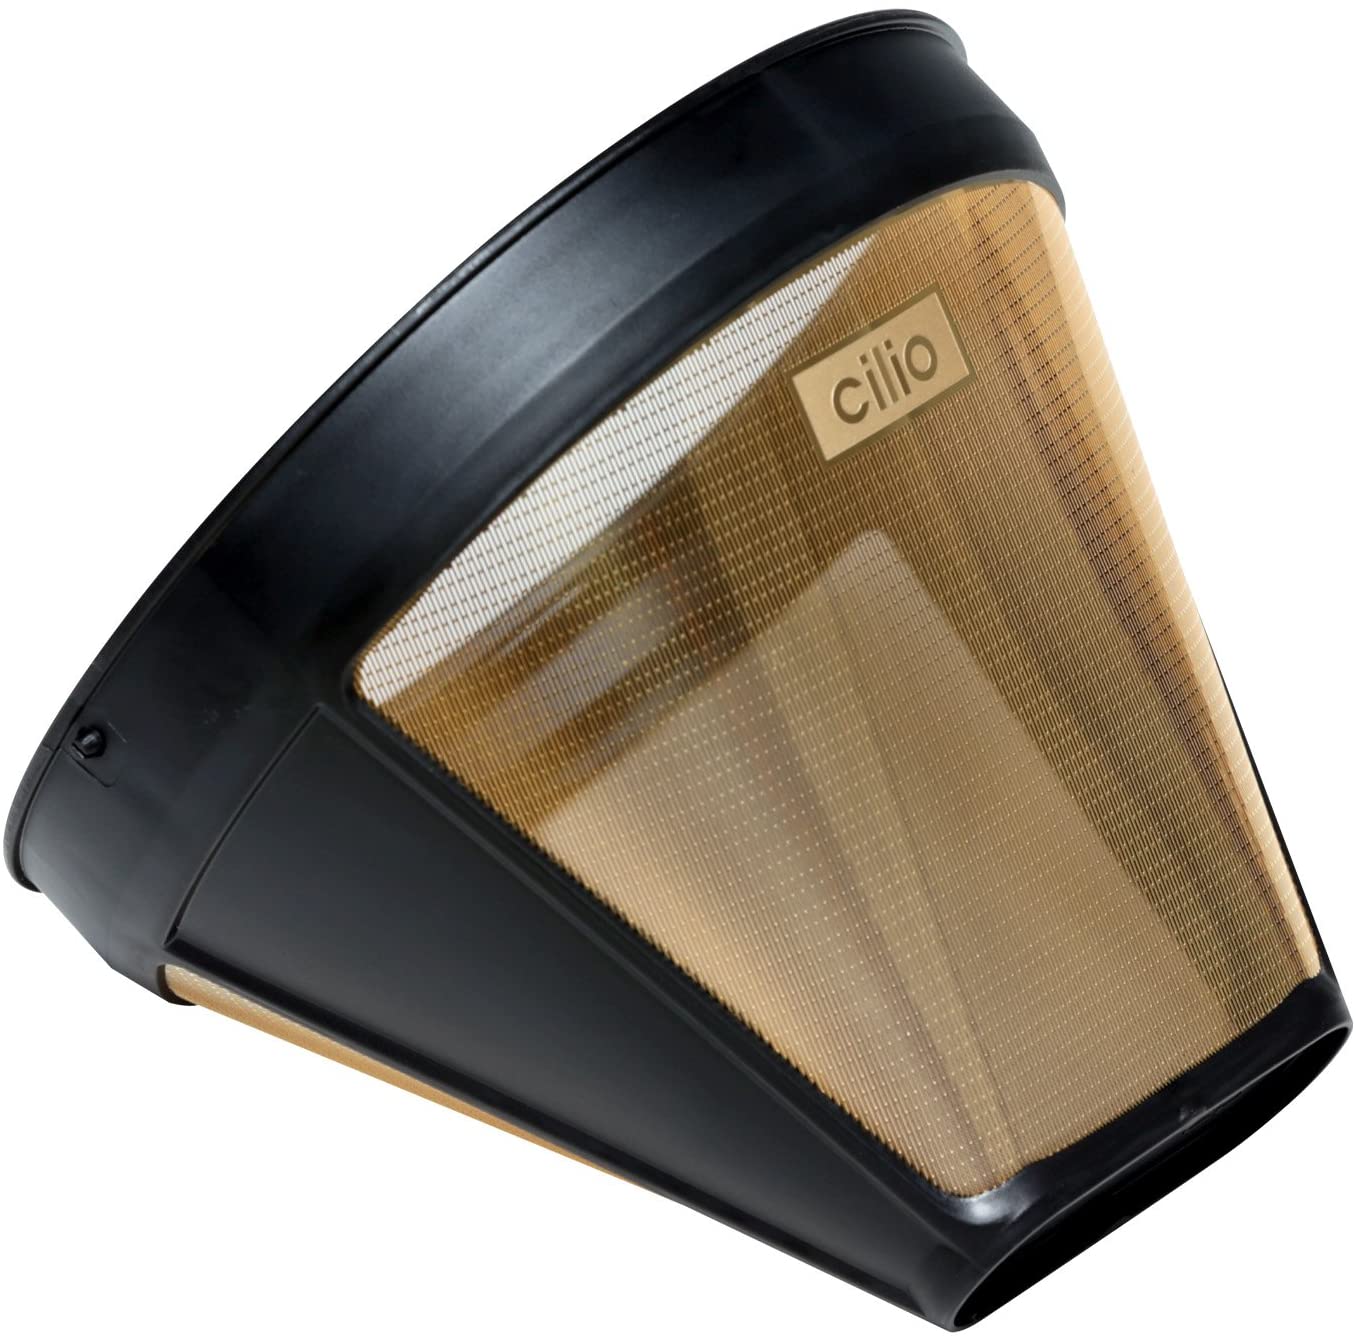 Cilio C116007 Coffee Filter Size 4 Gold, one